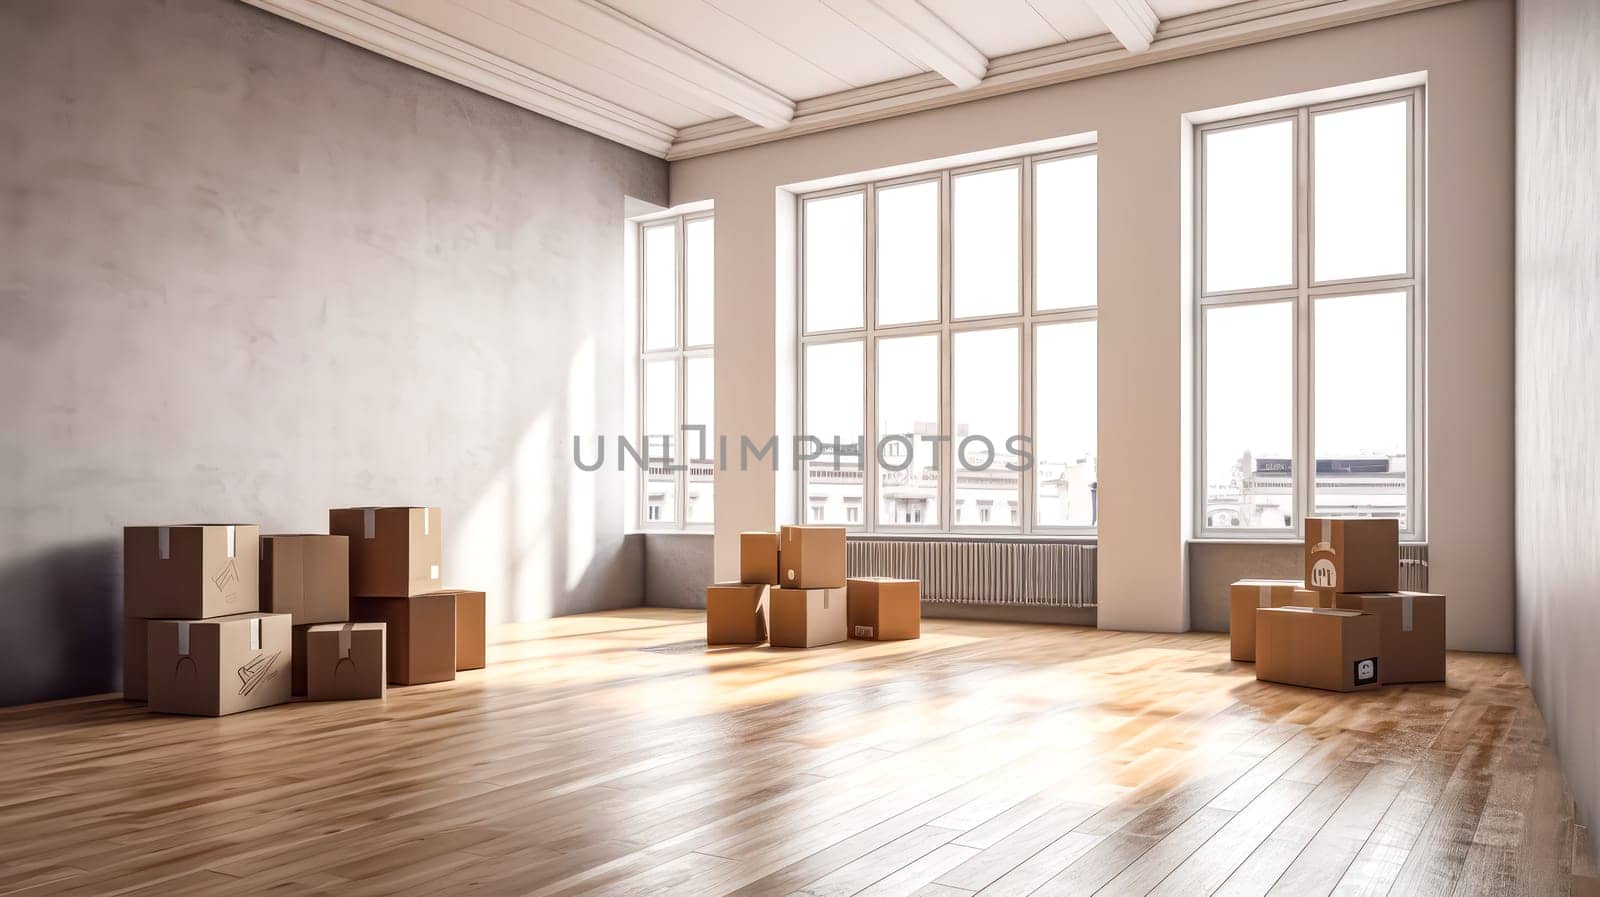 Cardboard boxes and household items indoors, ideal for moving day concepts. by Alla_Morozova93